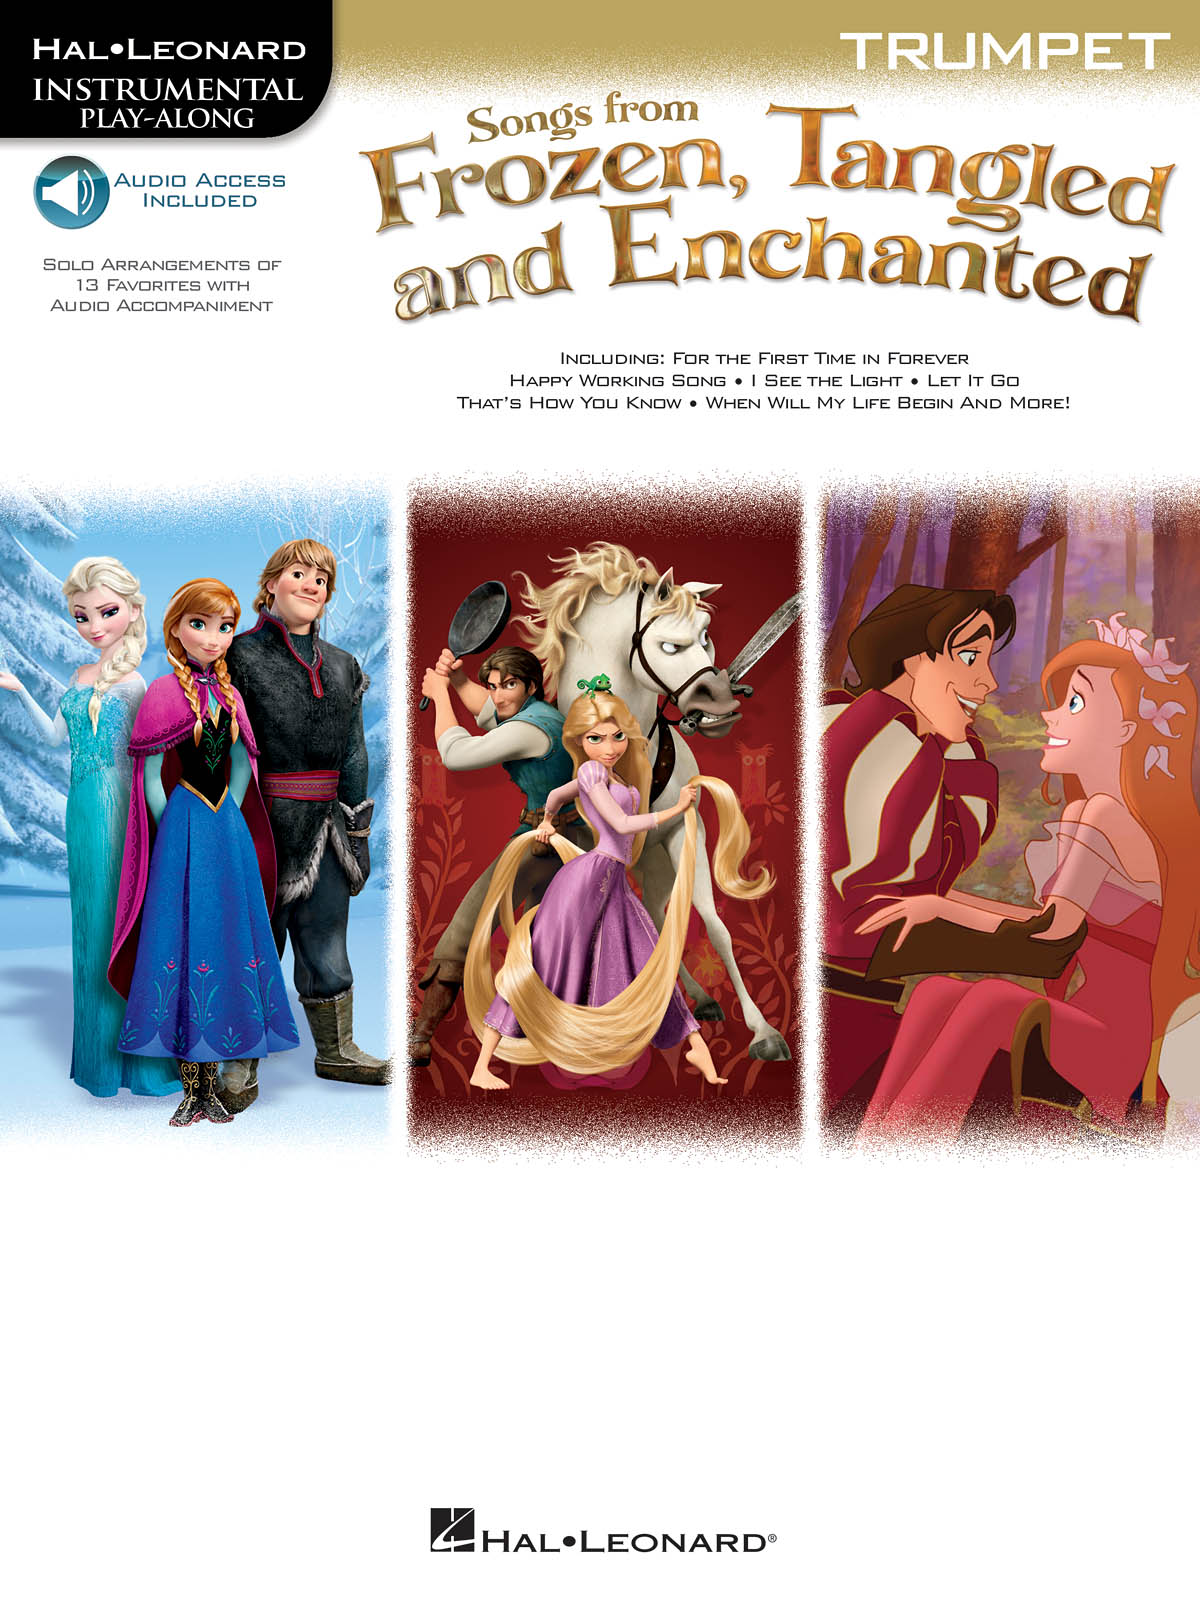 Songs from Frozen, Tangled and Enchanted Trumpet